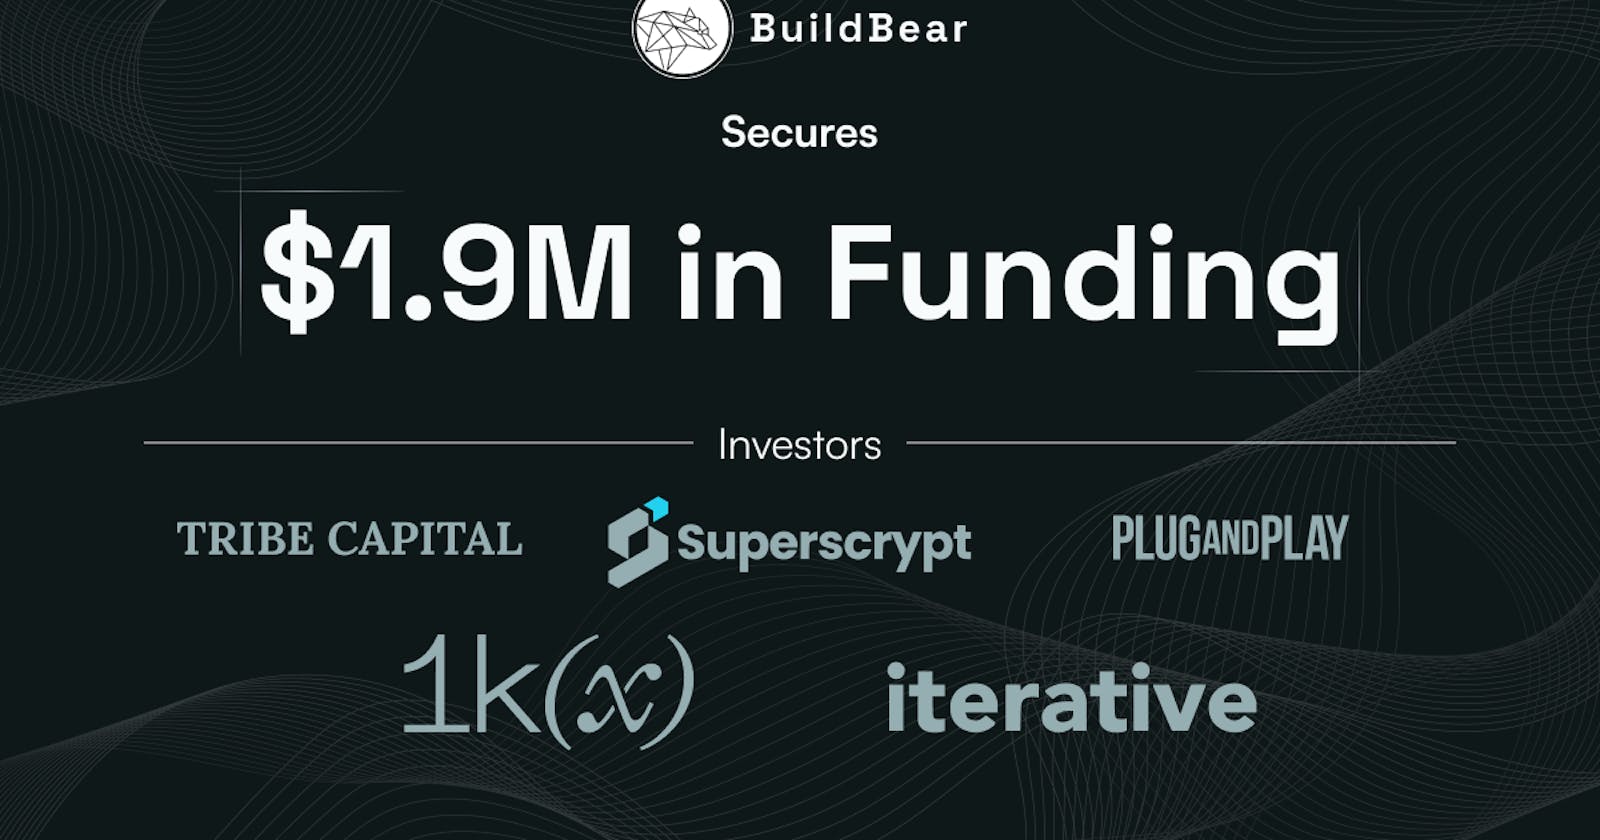 BuildBear Labs Secures $1.9M to Advance Web3 Development Tools with the Release of its New Phoenix Engine.